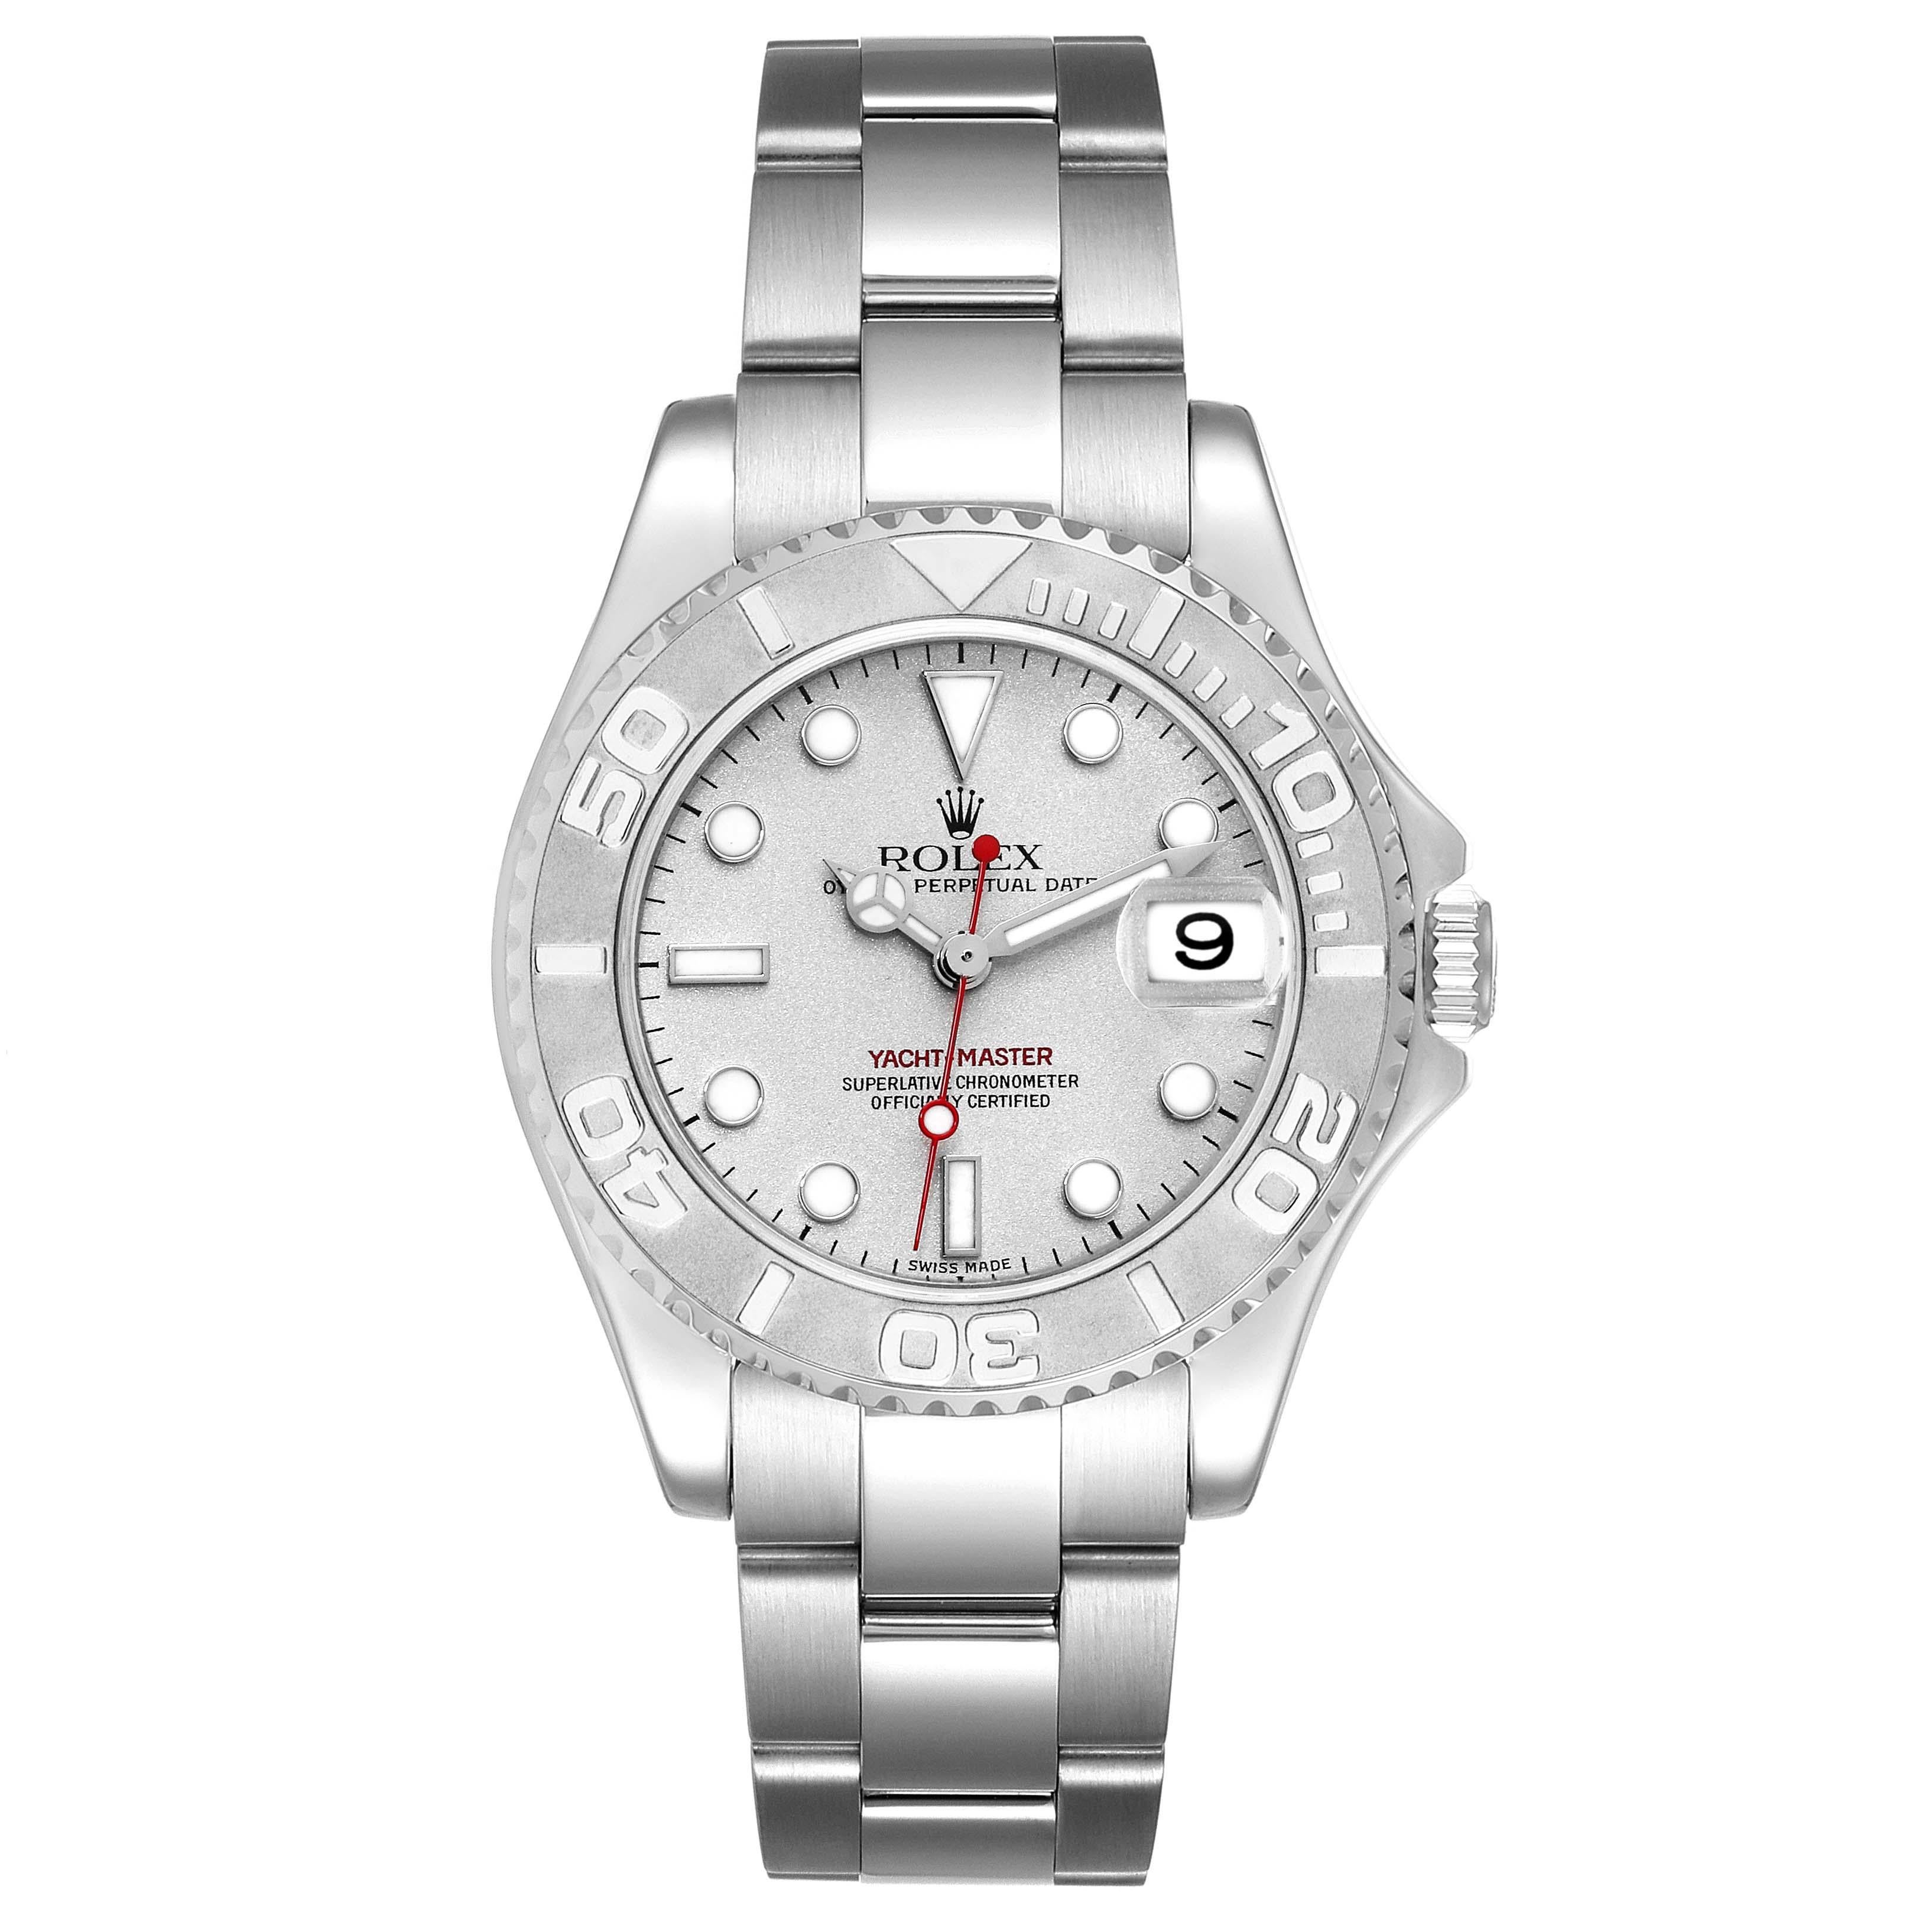 Rolex Yachtmaster 35 Midsize Steel Platinum Mens Watch 168622 Box Papers. Officially certified chronometer automatic self-winding movement. Stainless steel case 35.0 mm in diameter. Rolex logo on the crown. Platinum special time-lapse bidirectional